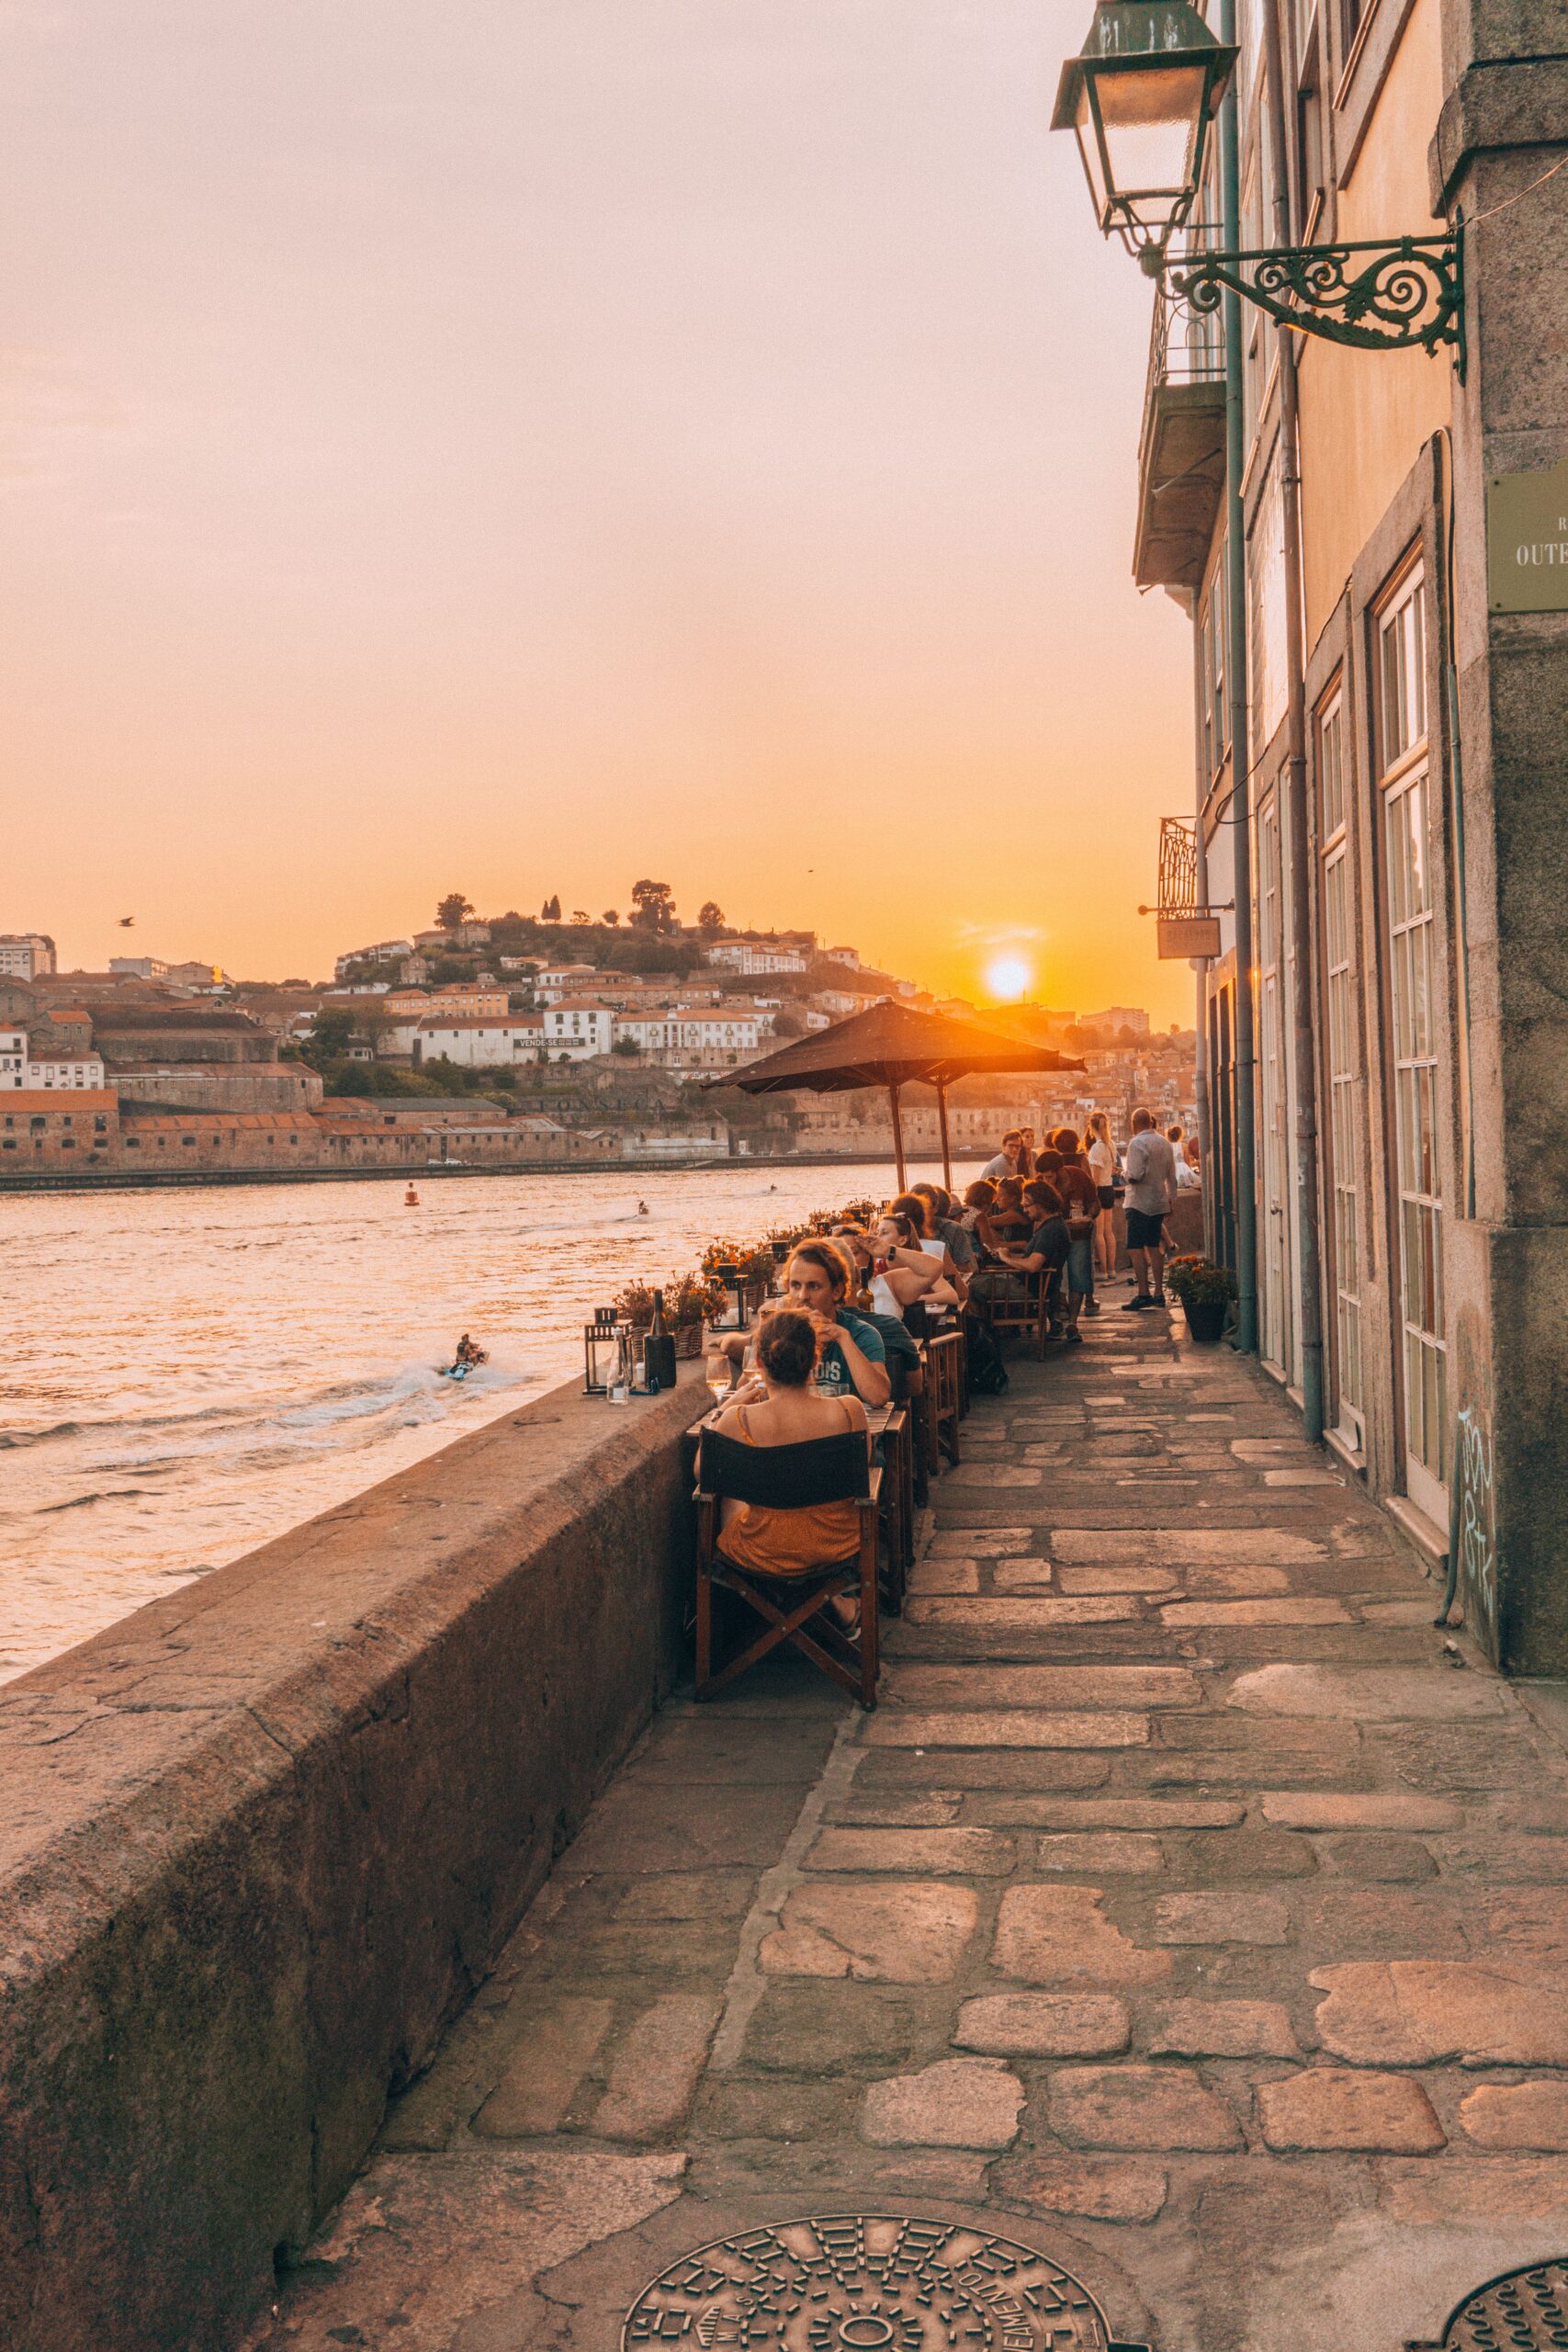 The golden glow of sunset at Bacalhau Restaurant beside the Douro River, in Porto, Portugal